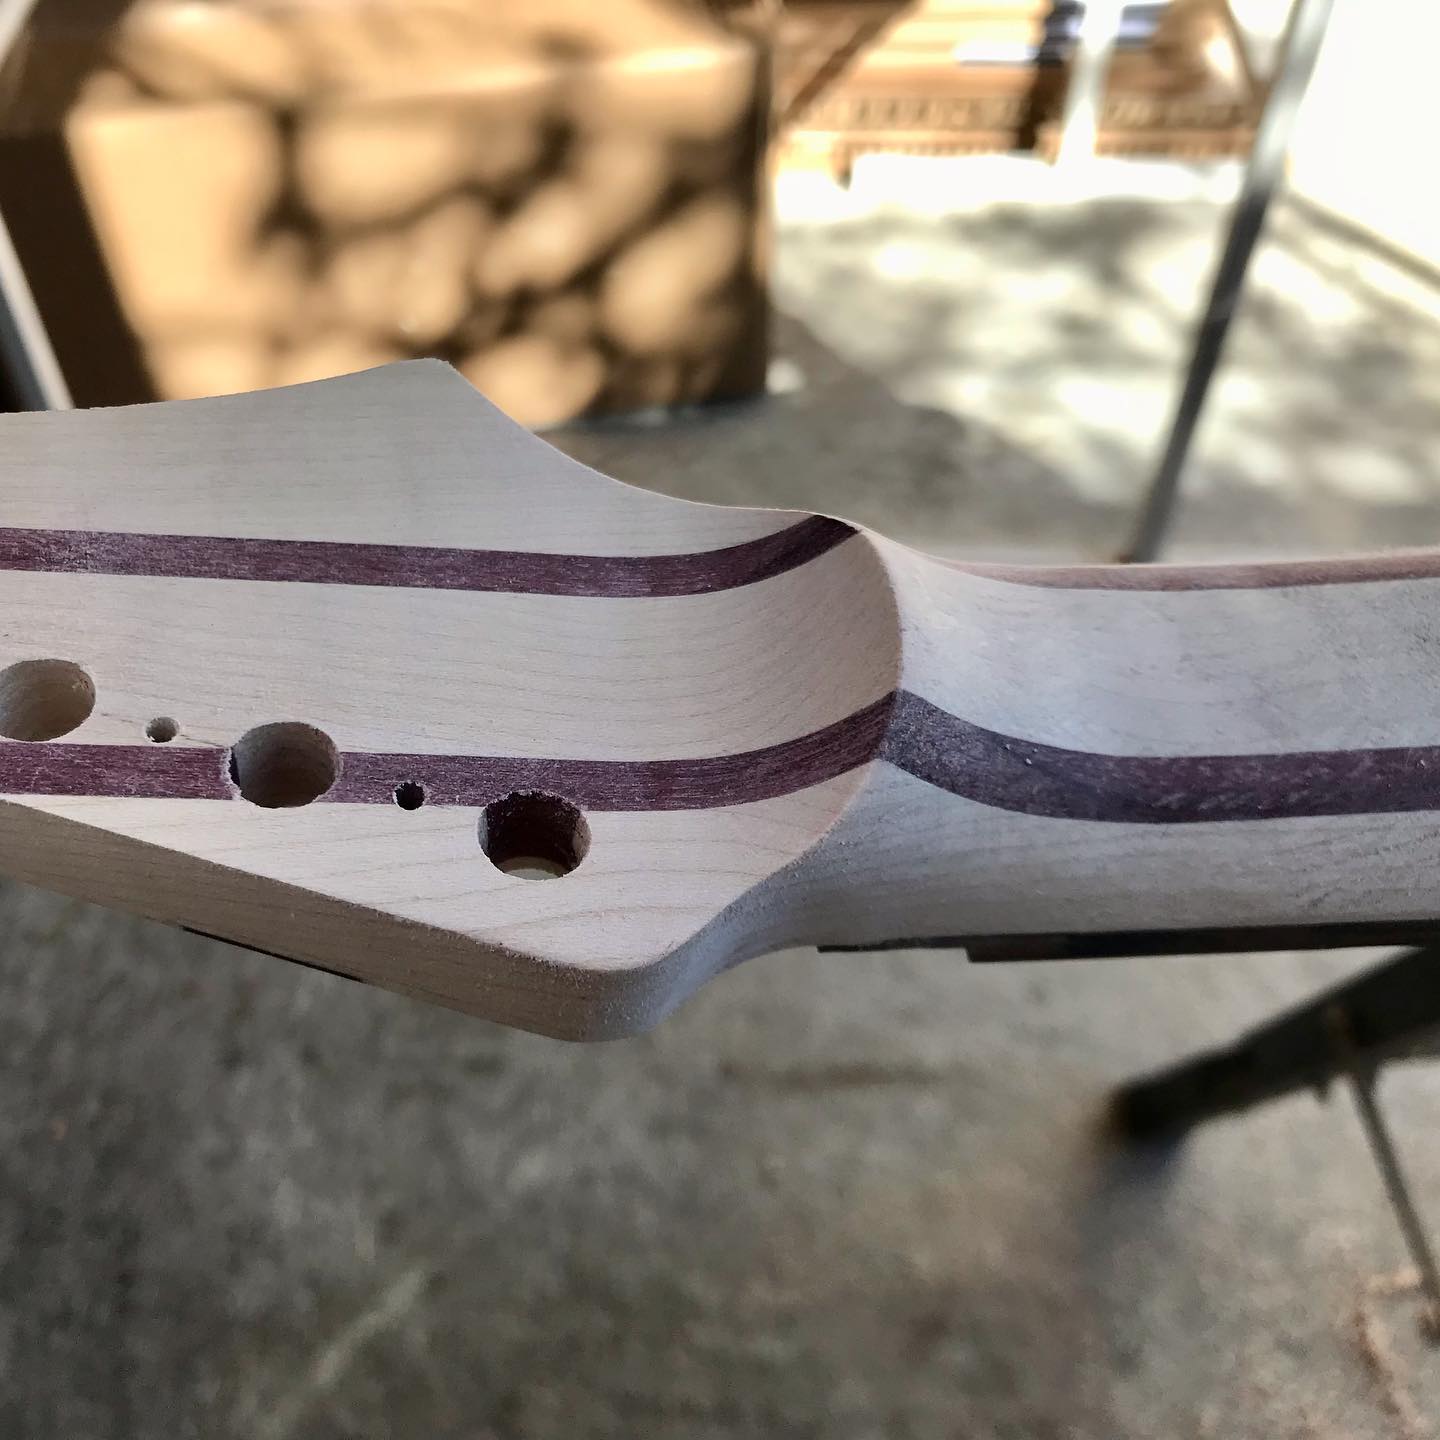 Another volute is coming 😉
#guitar #guitarist #guitare #lutherie #luthierfrance #luthier #superstrat #purpleheartwood #amarante #maplewood #woodworking #teamvolute